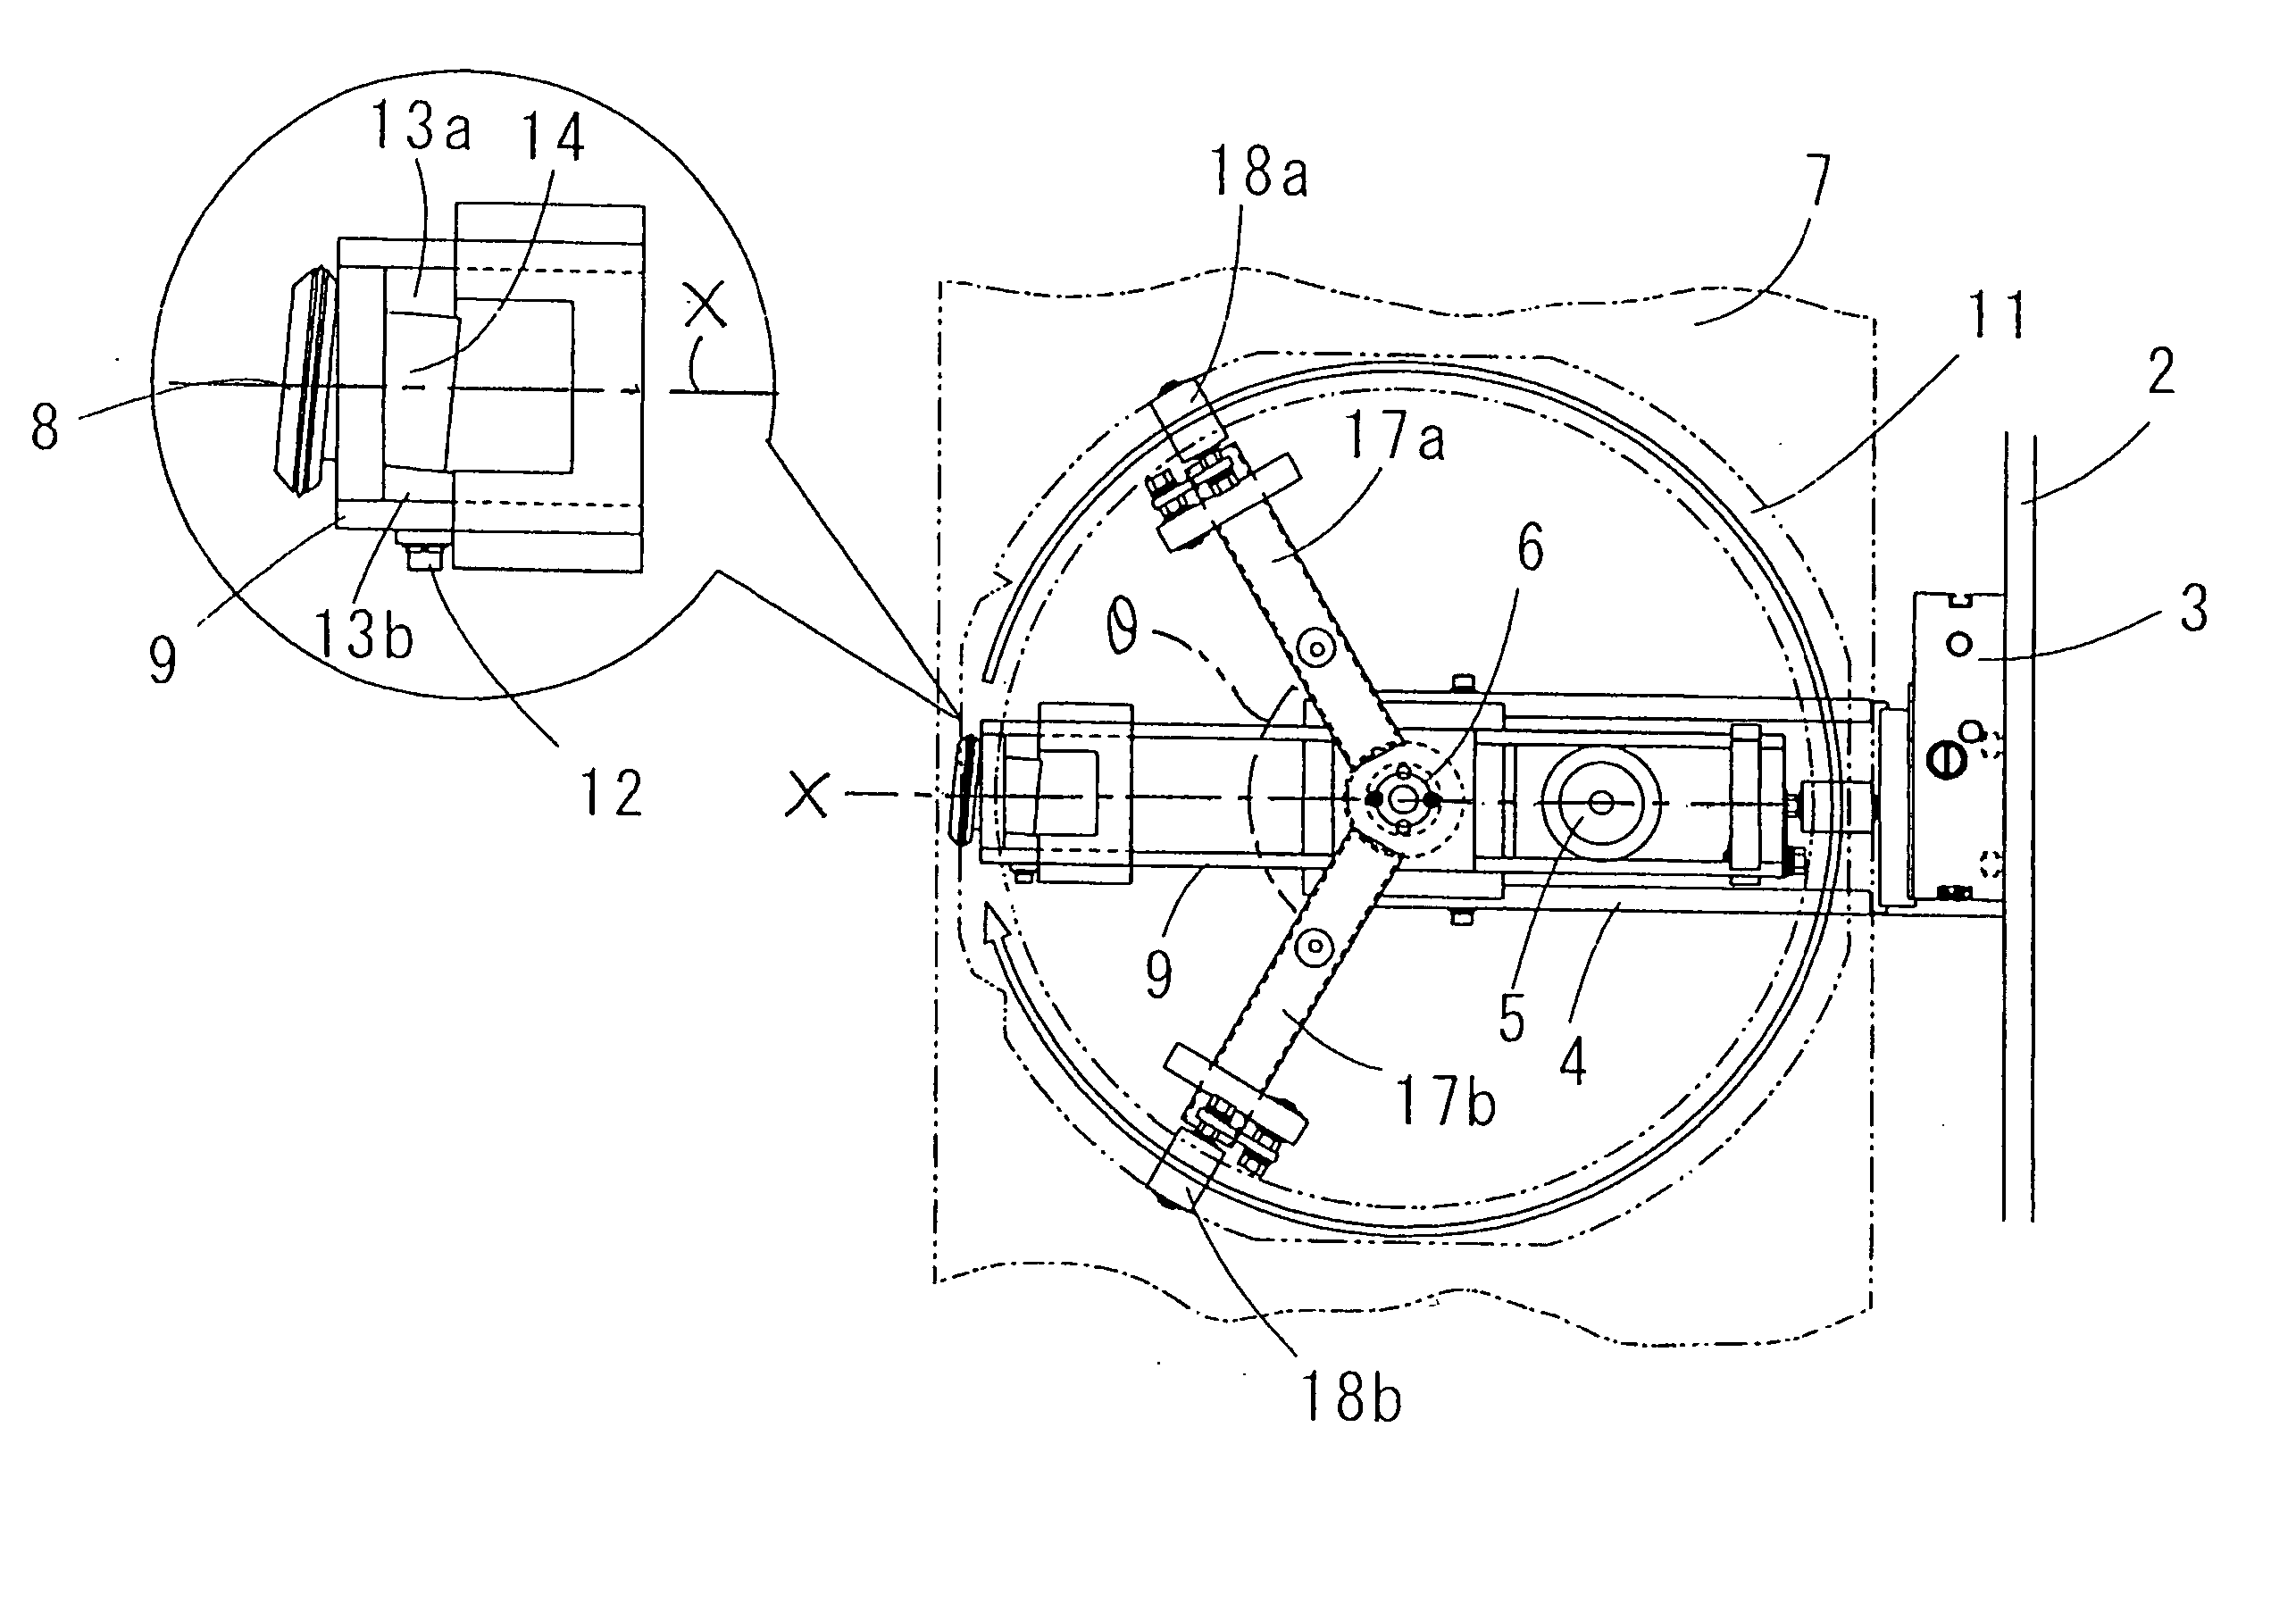 Method and apparatus for cutting adhesive tape